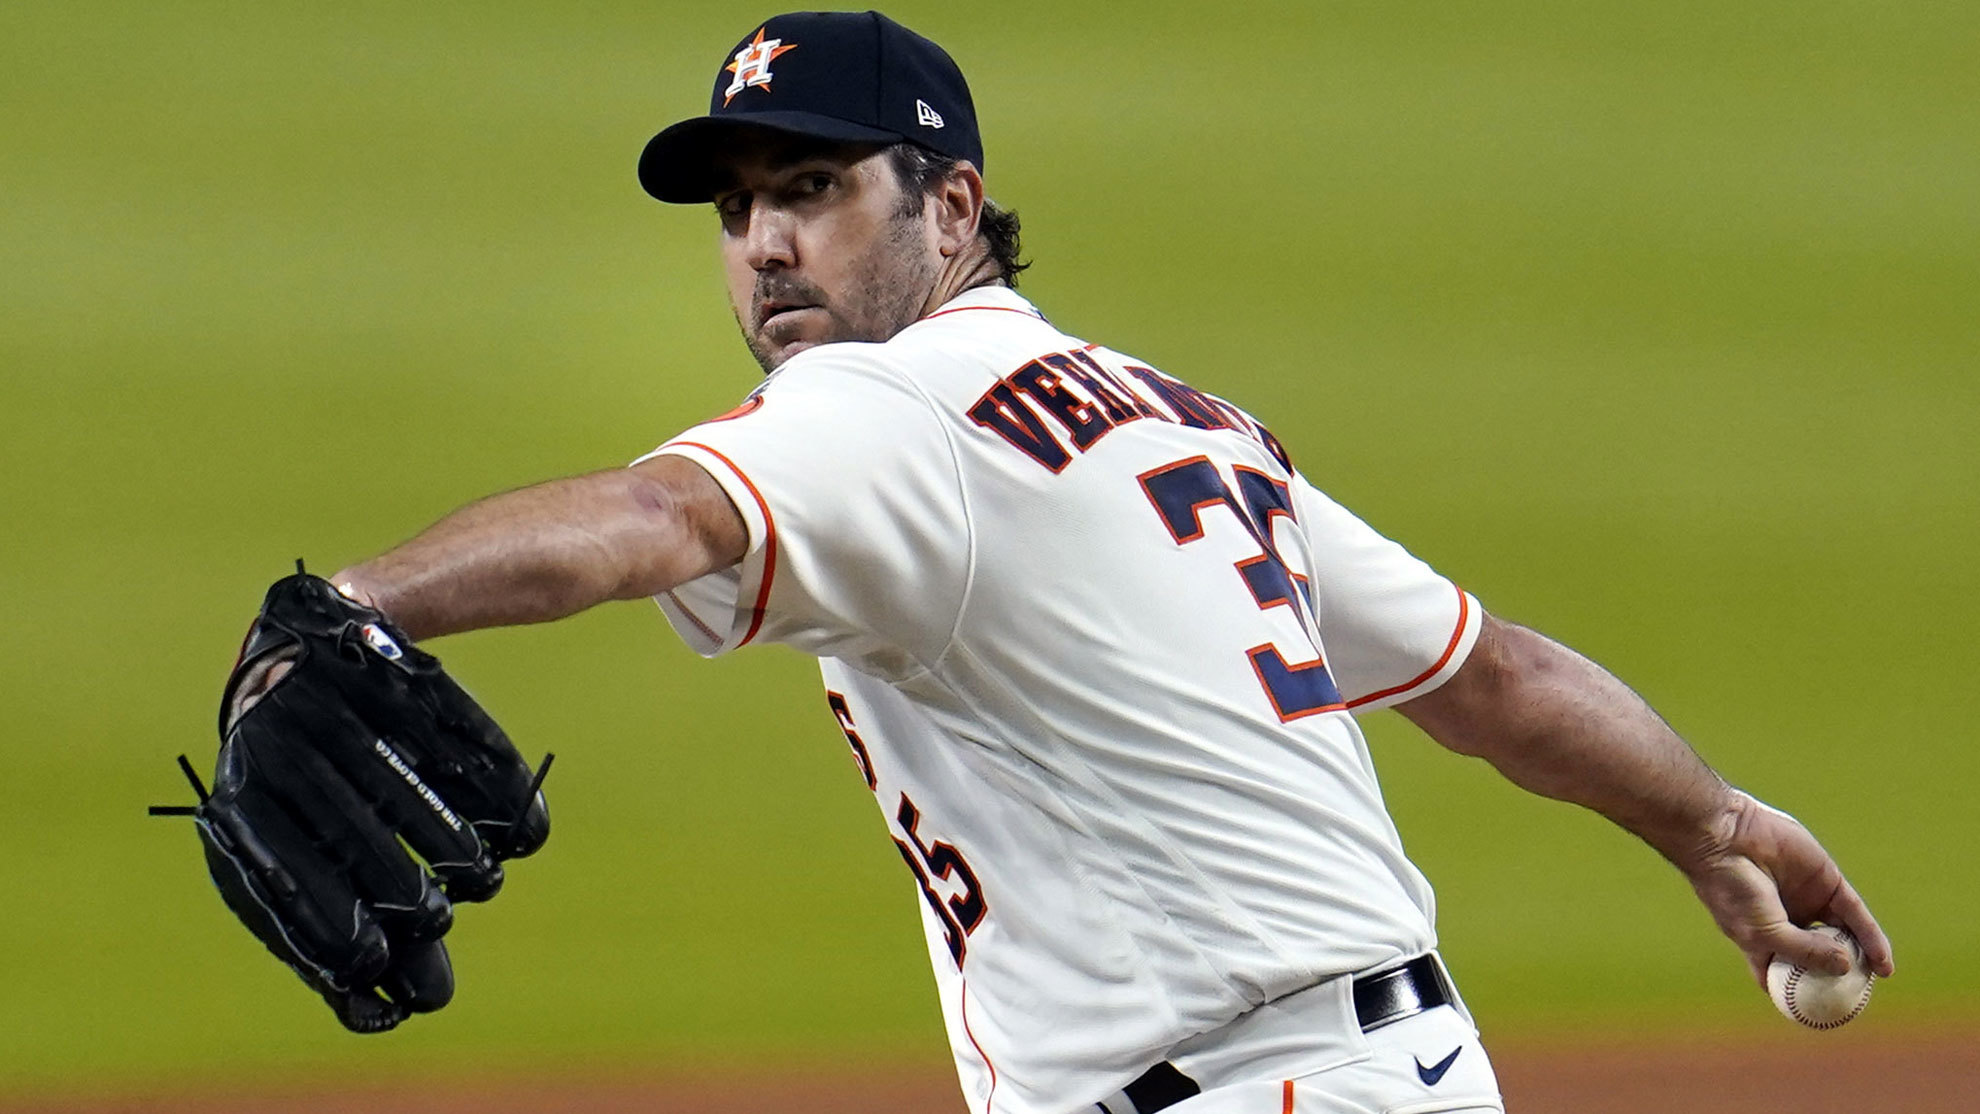 Verlander is ready to play again with Houston.